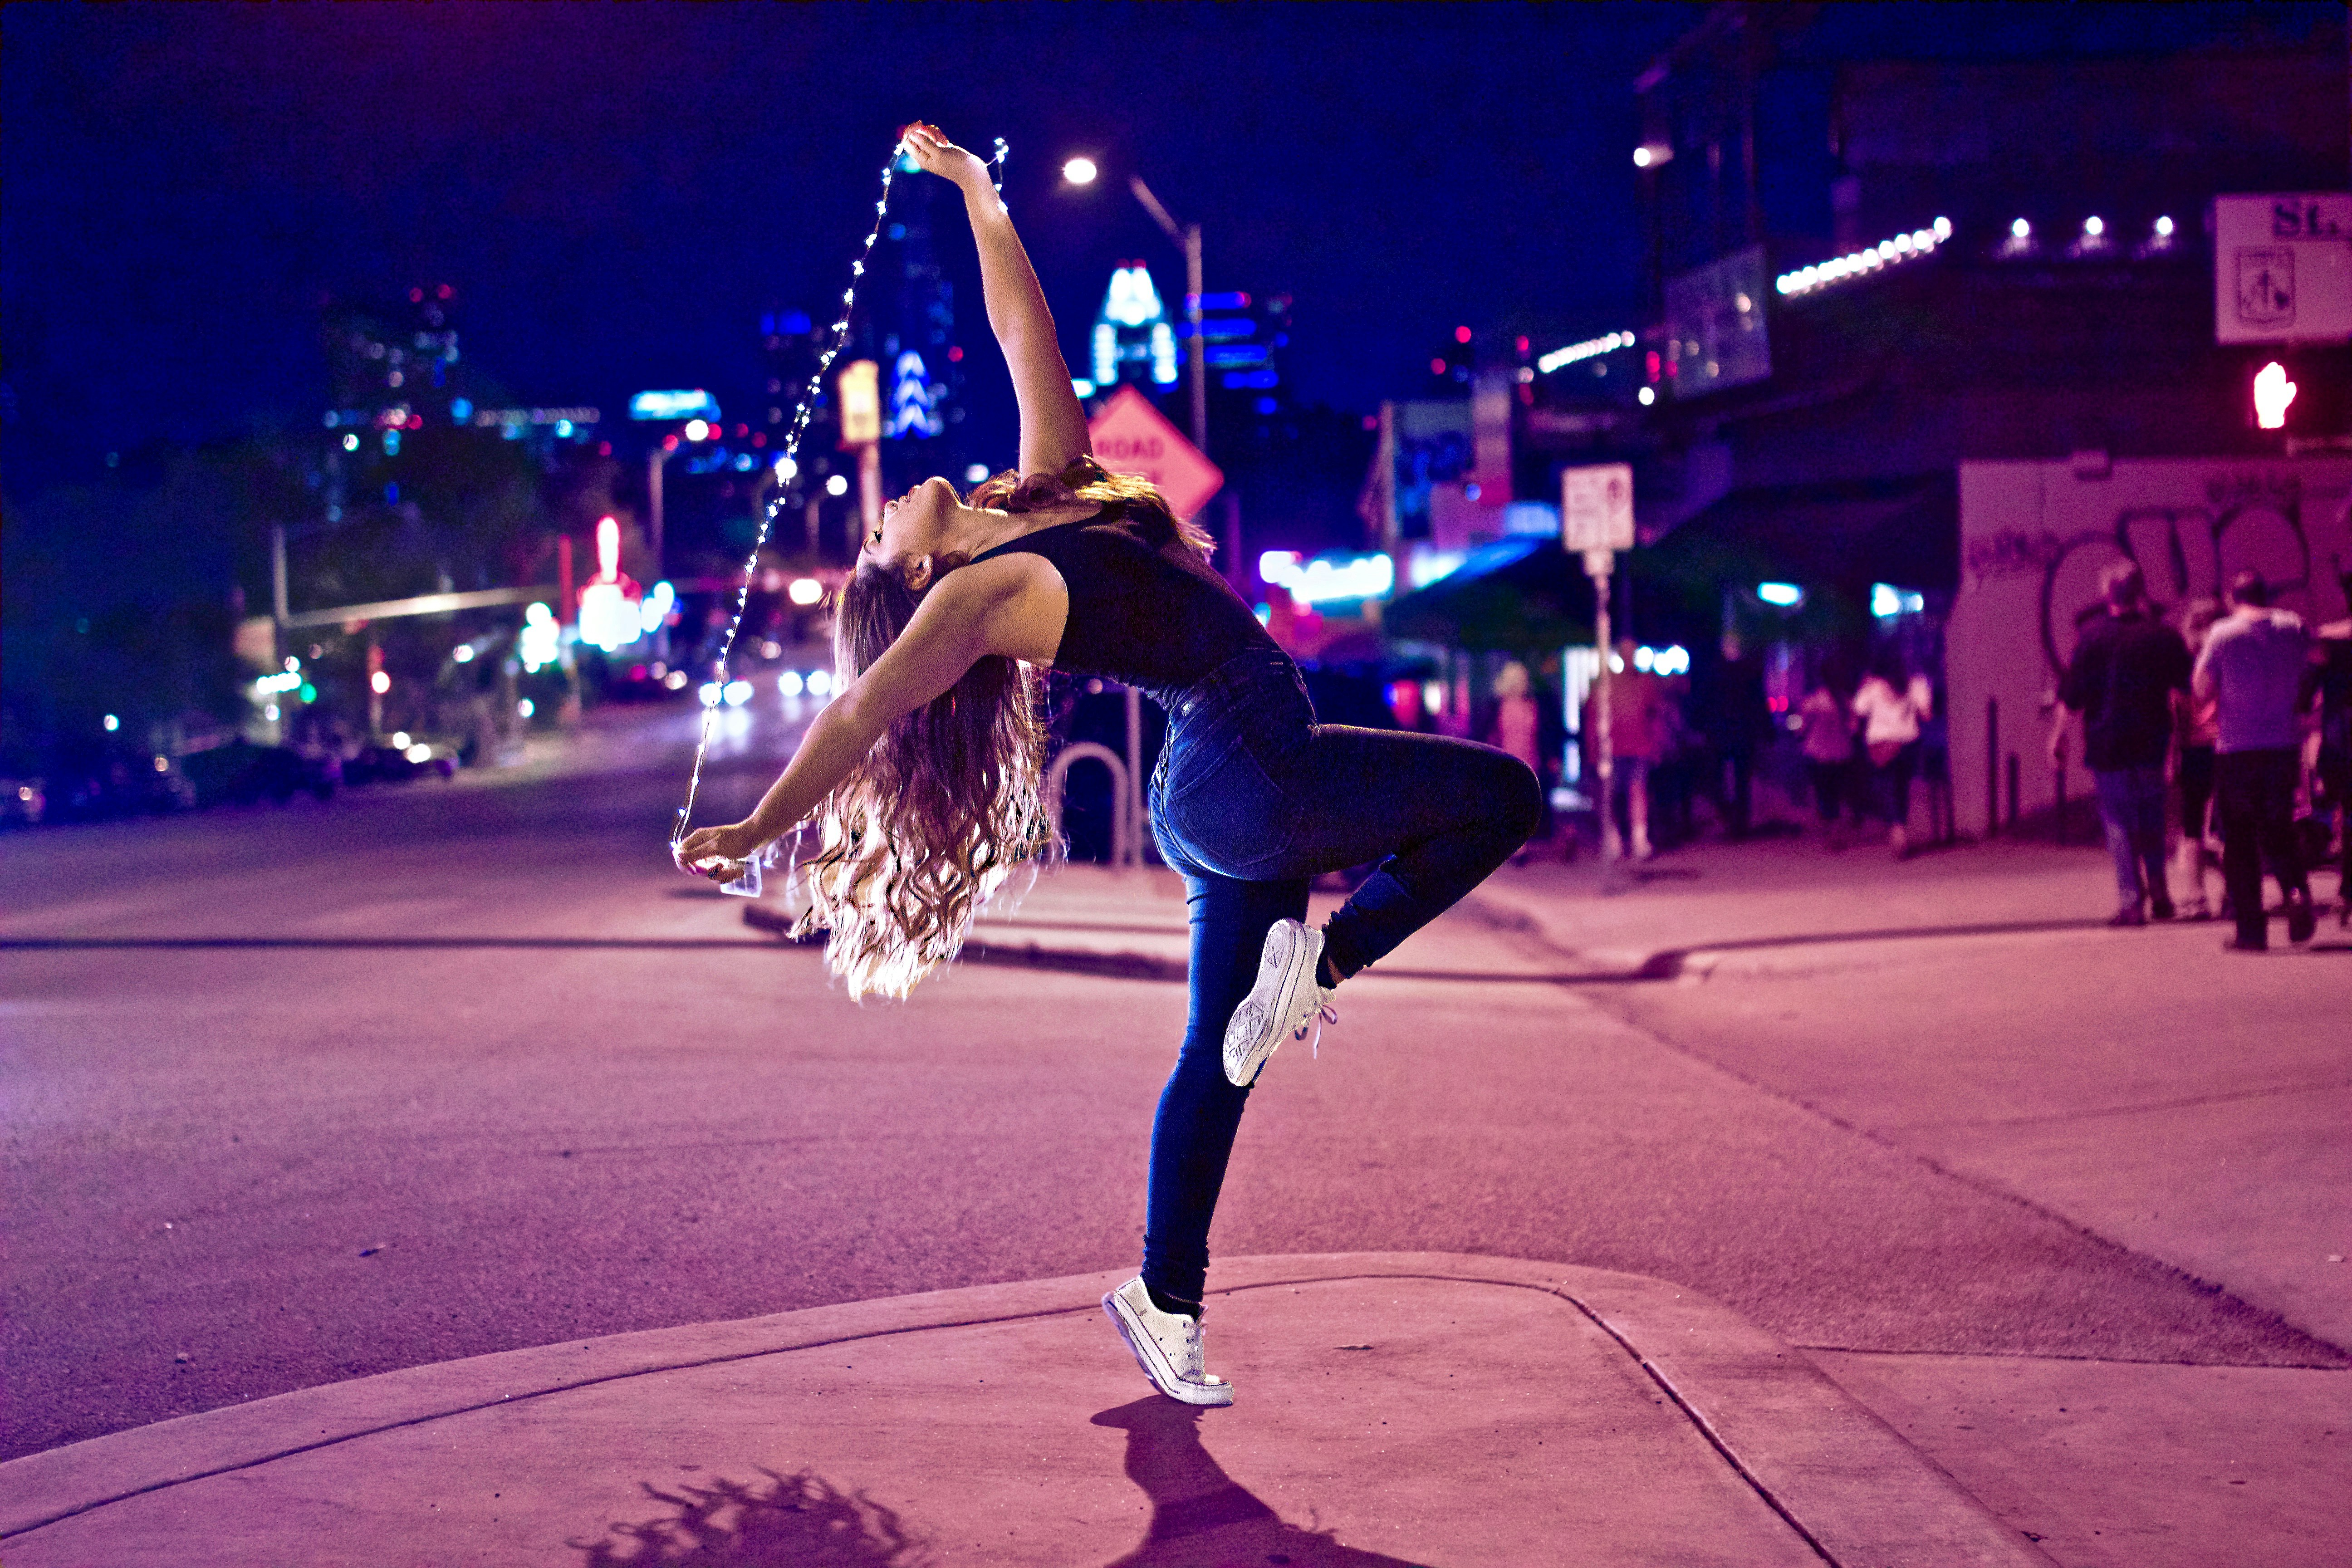 Woman dancing on the street at night